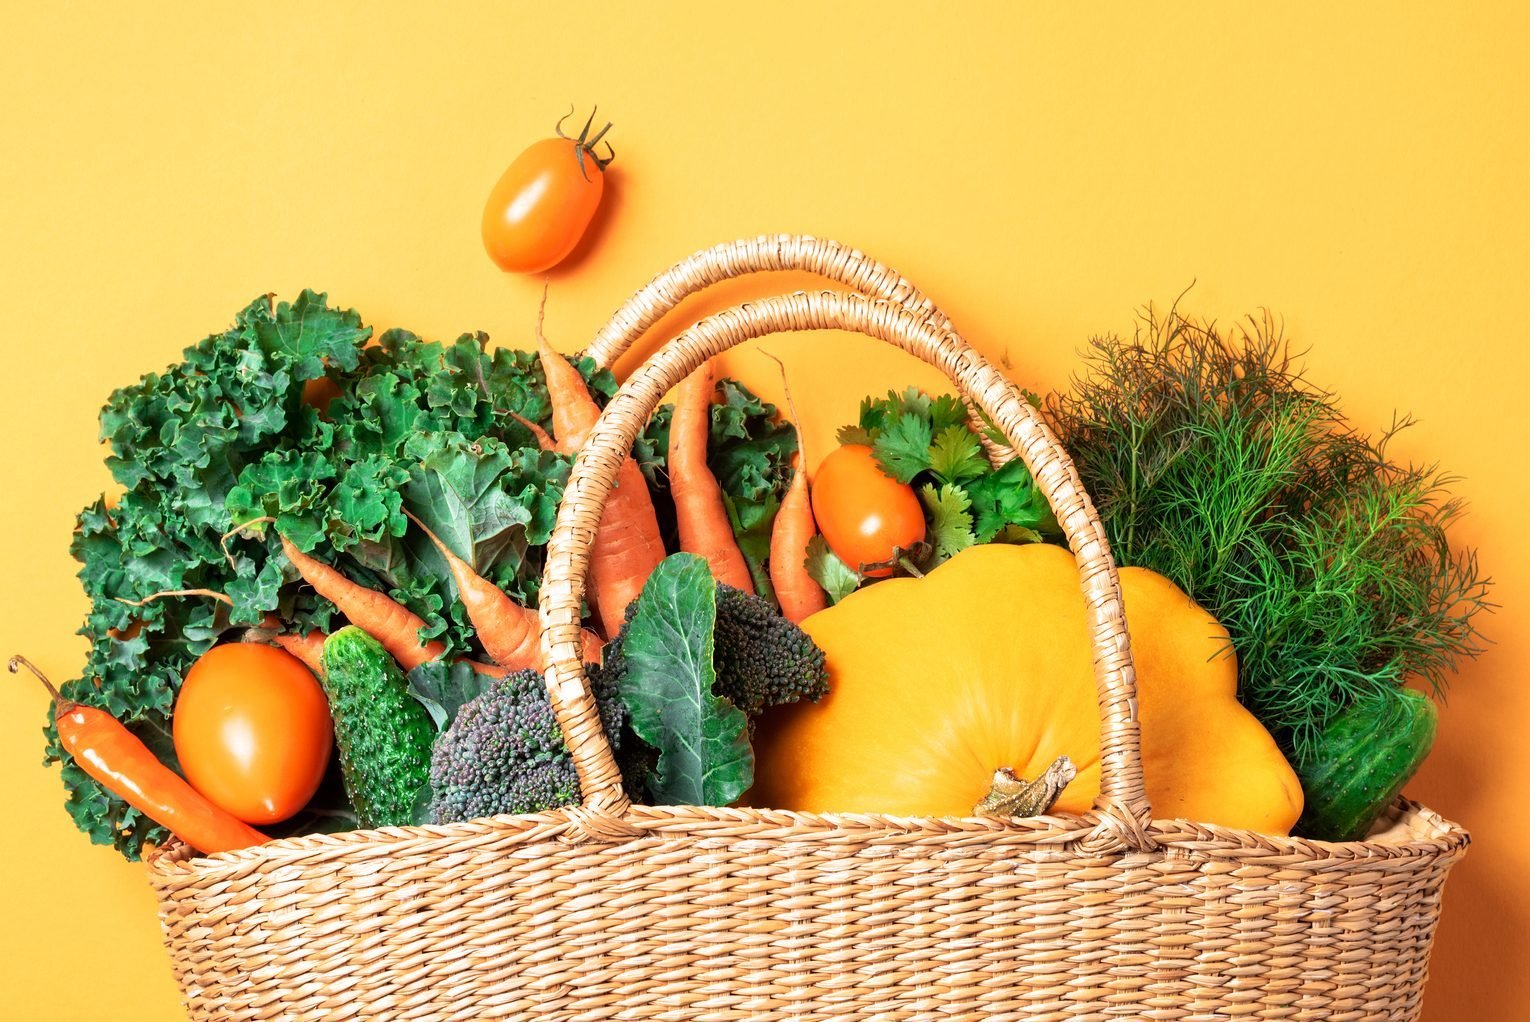 Straw basket with organic vegetables over trendy yellow background. Healthy food, vegetarian diet. Eco friendly, zero waste, plastic free concept.